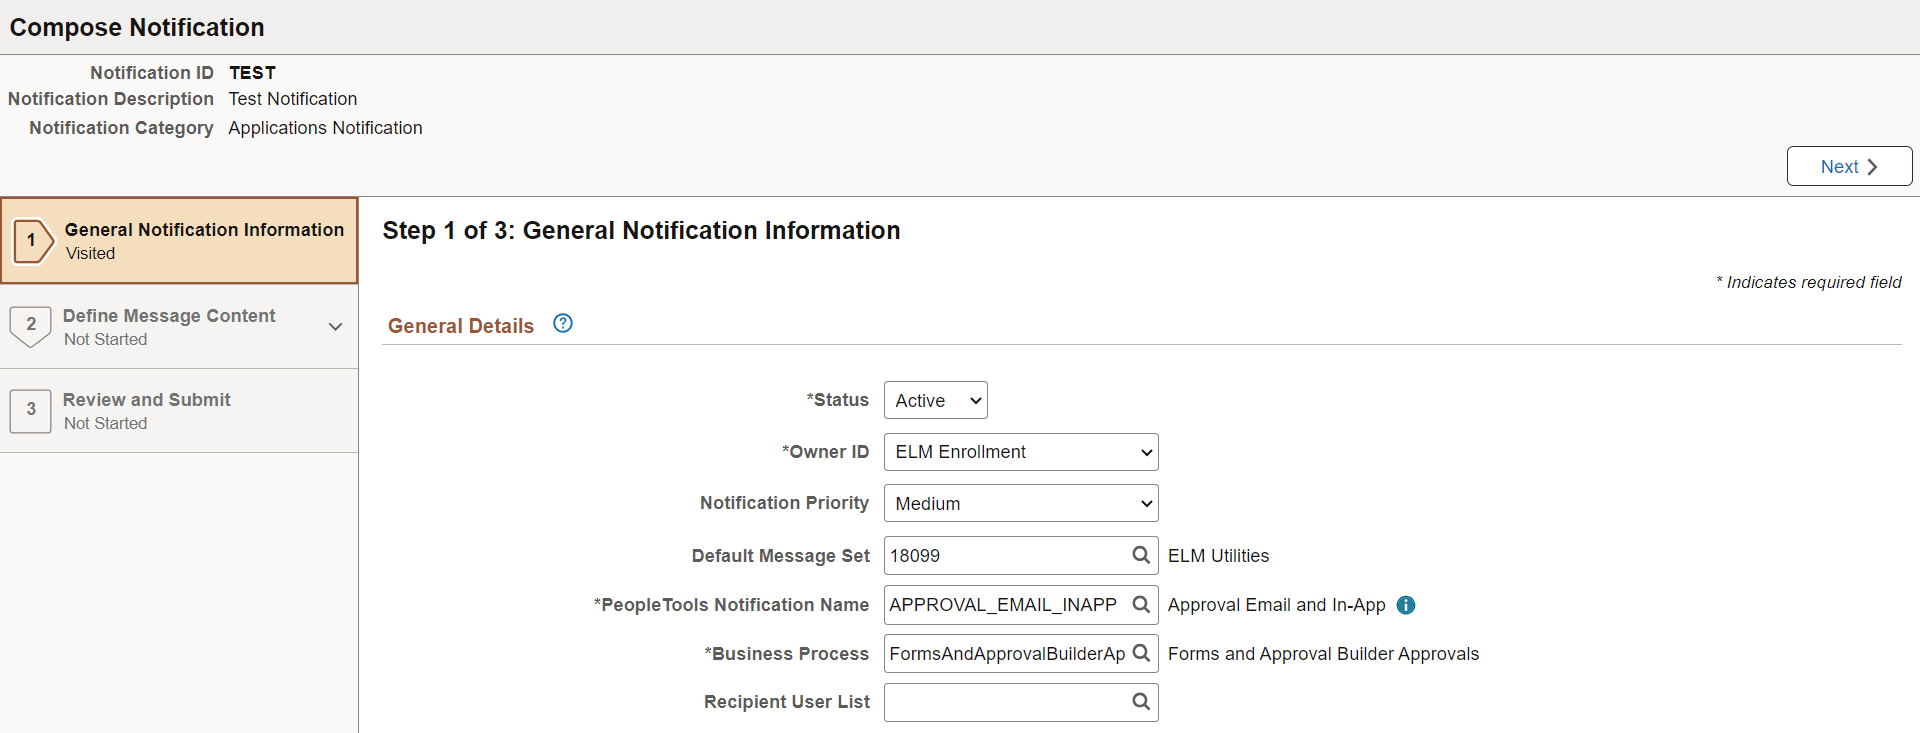 Step 1 of 3, General Notification Information page